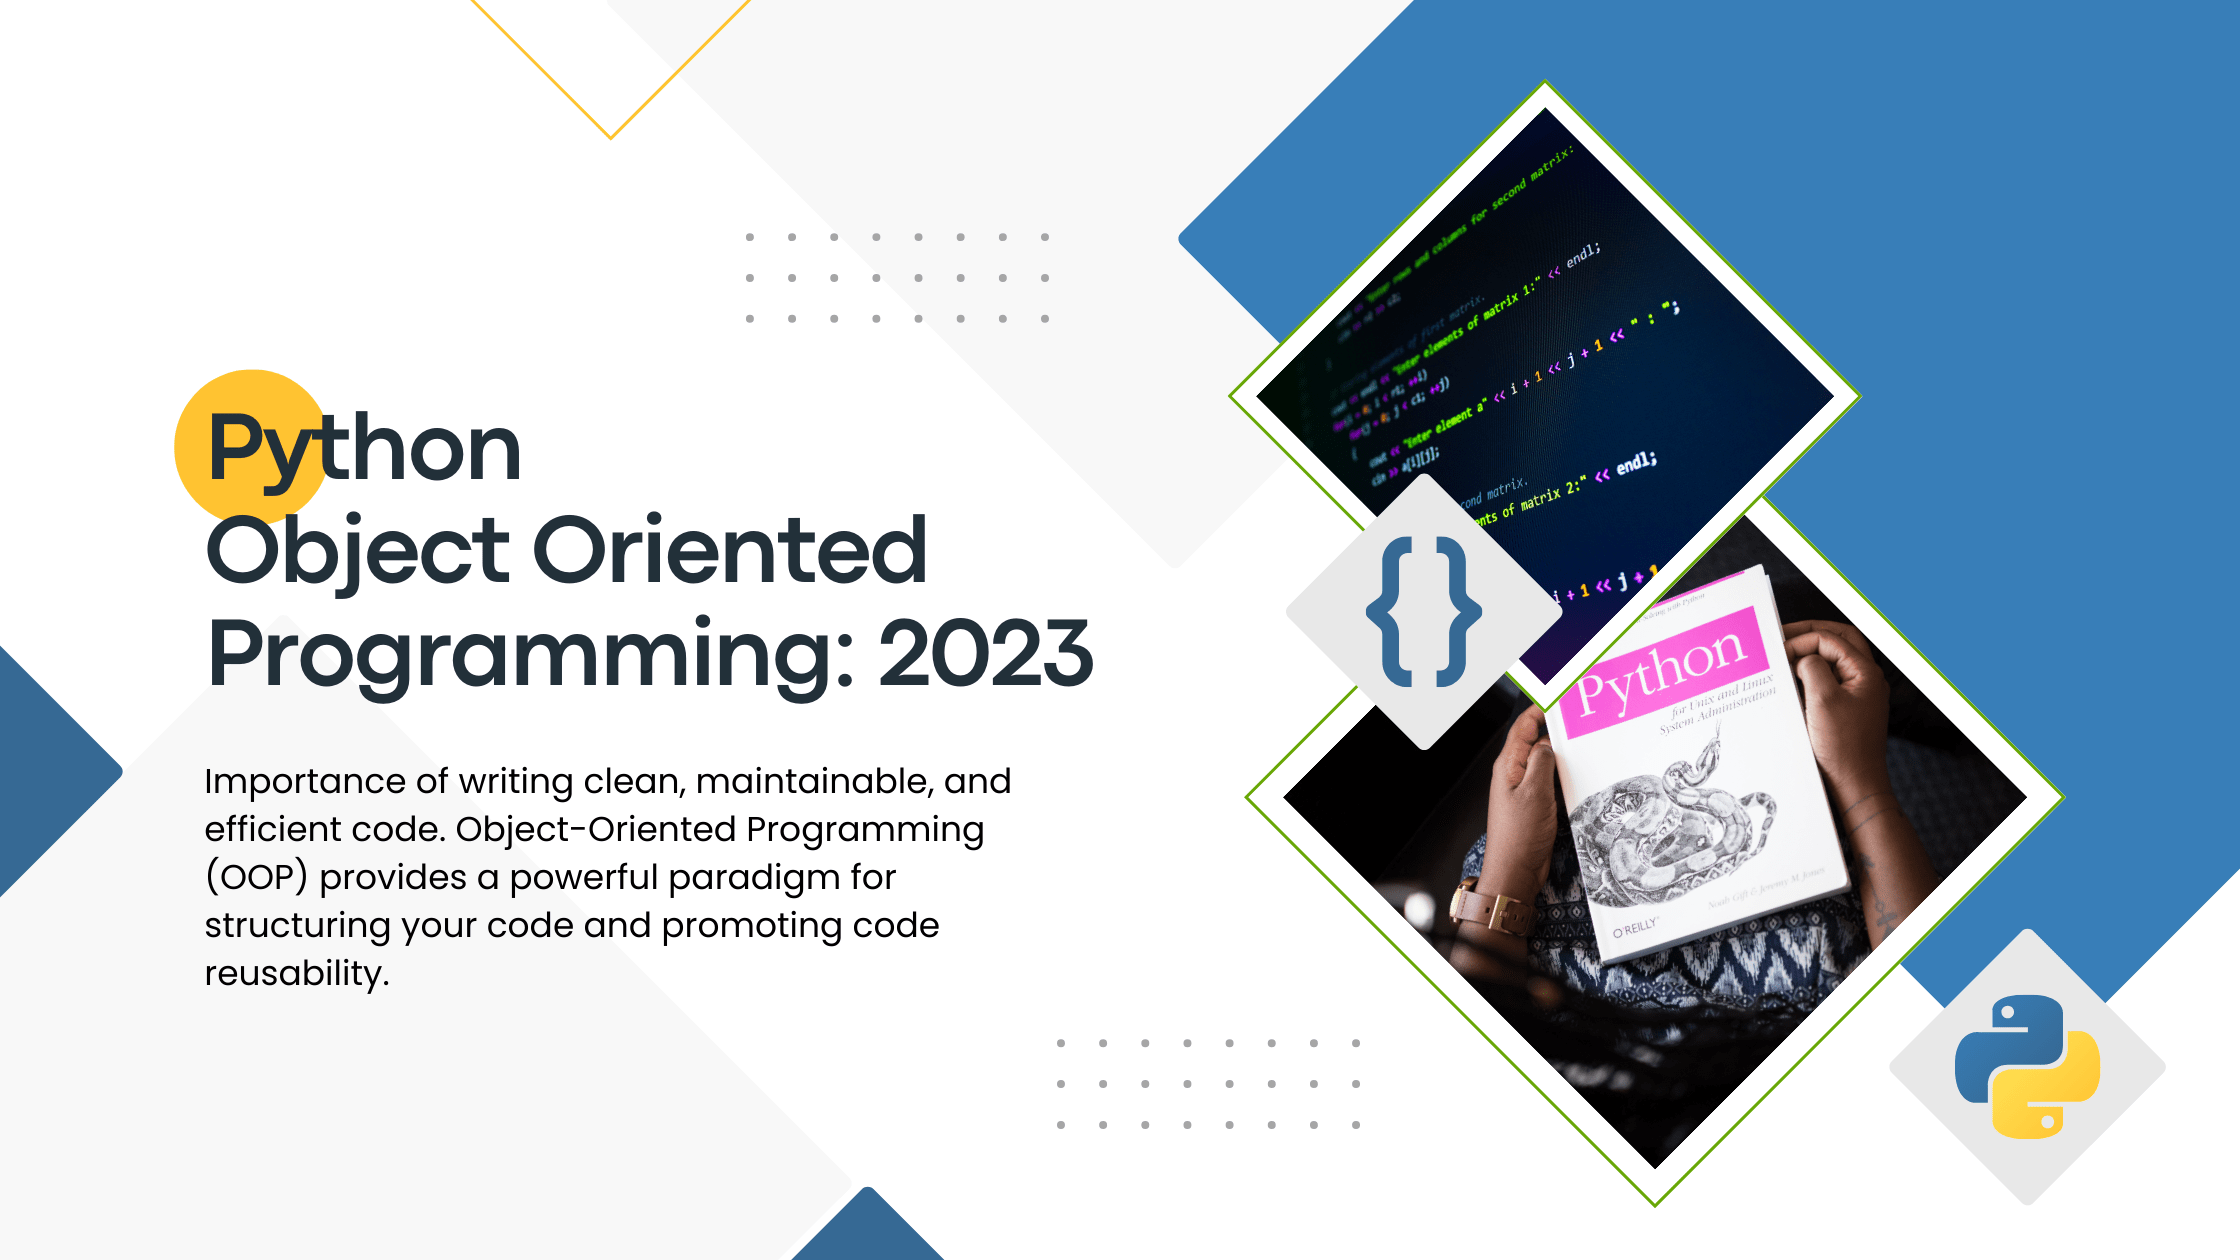 Python OOP (Object Oriented Programming) Best Practices in 2023